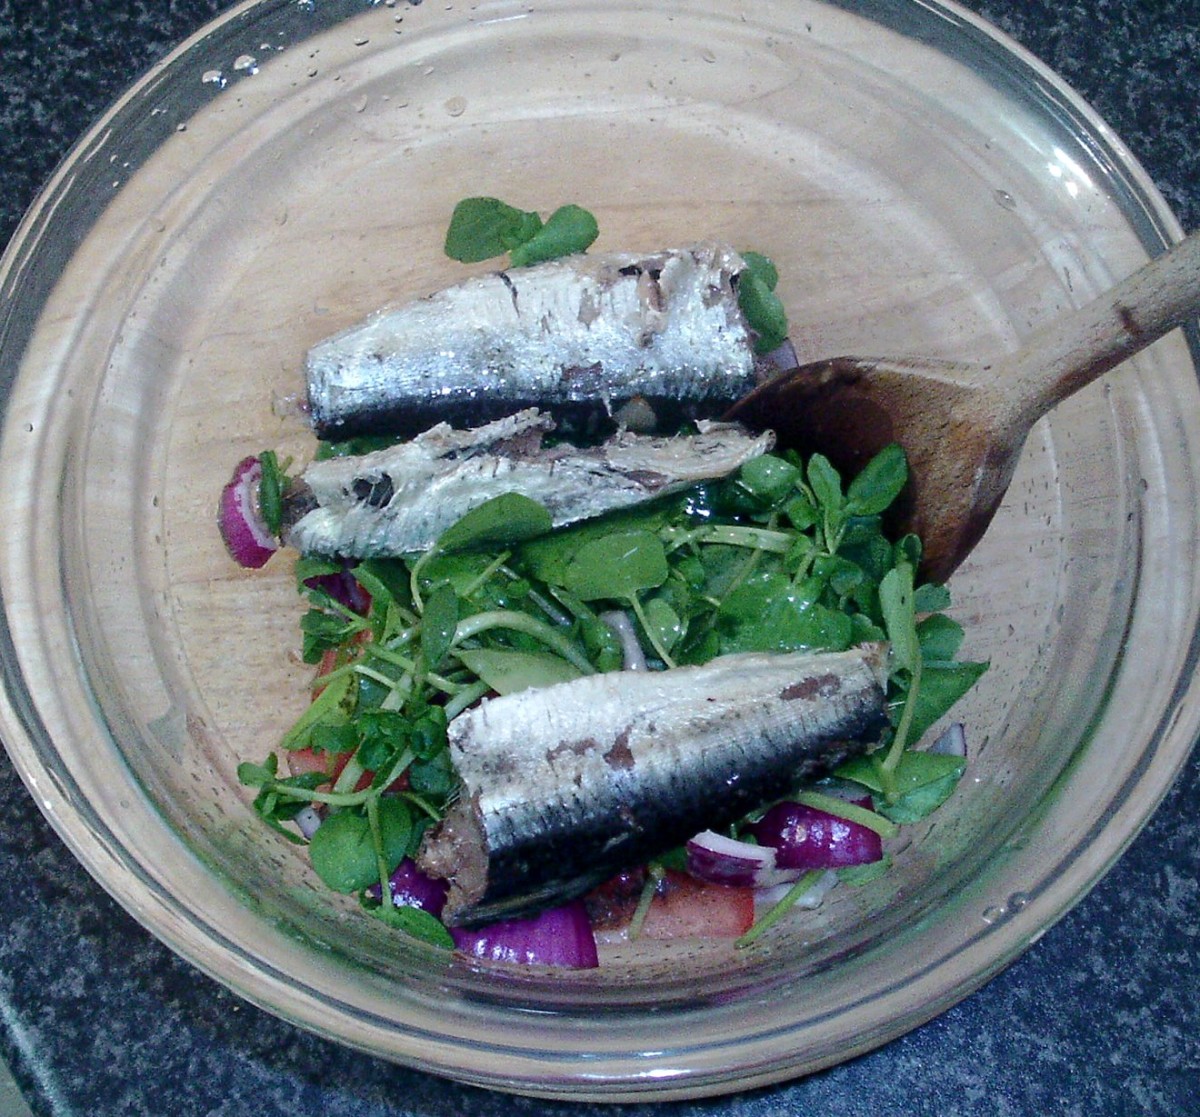 Sardines are added to watercress salad